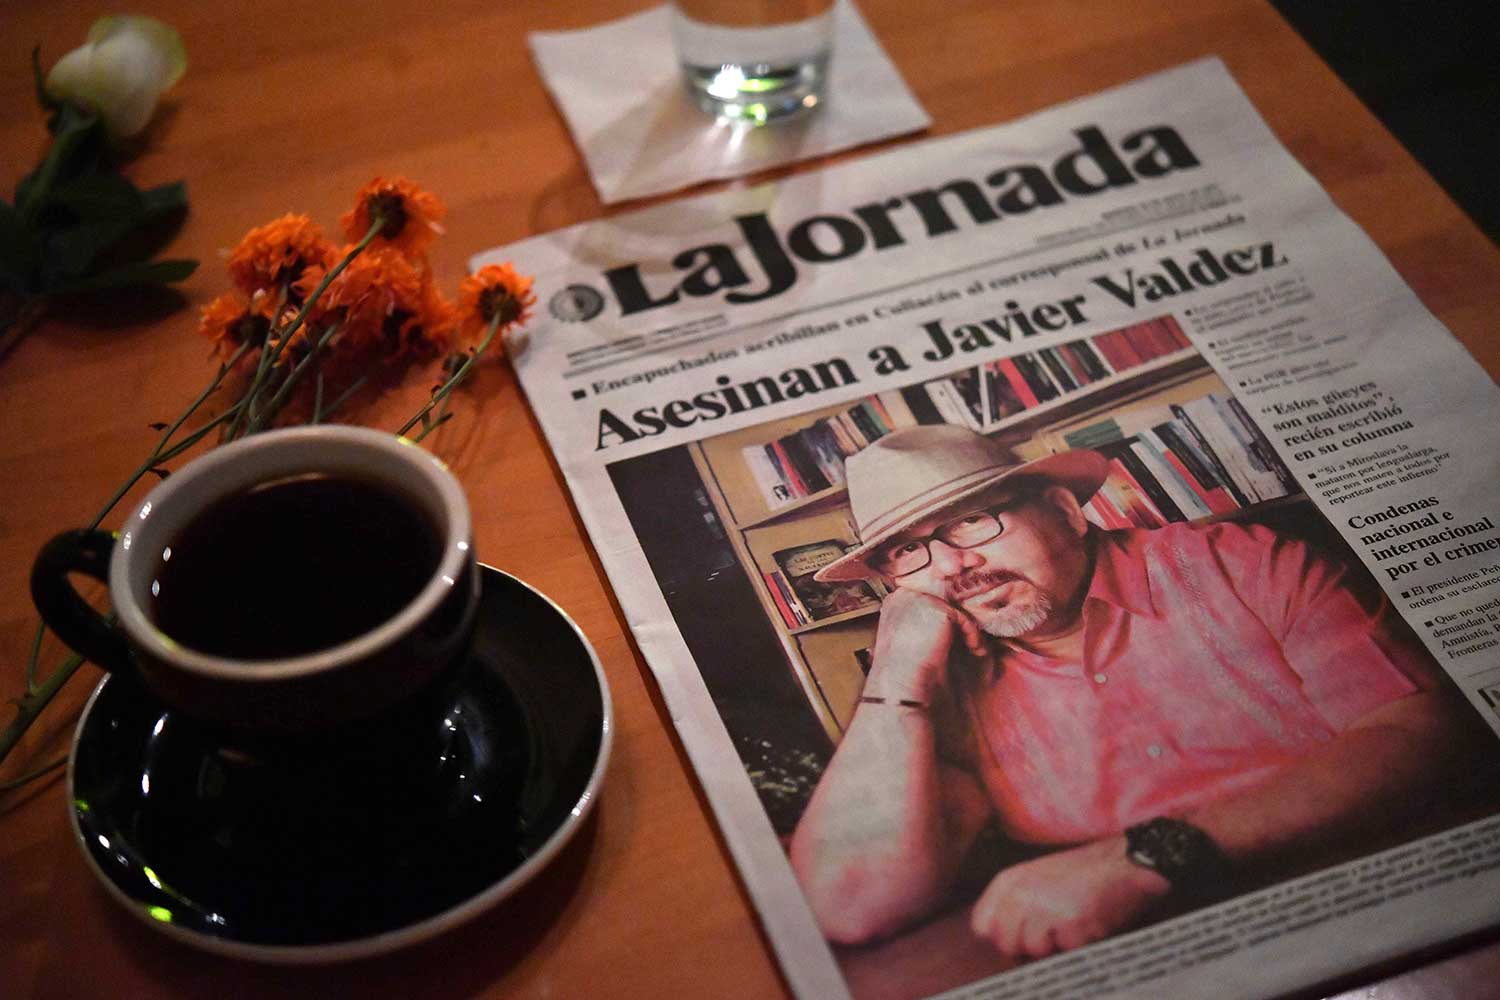 A tribute to Javier Valdez Cárdenas is left at a café in Culiacan that the Mexican journalist used to visit. Valdez was shot dead outside his office in May 2017. (AFP/Yuri Cortez)